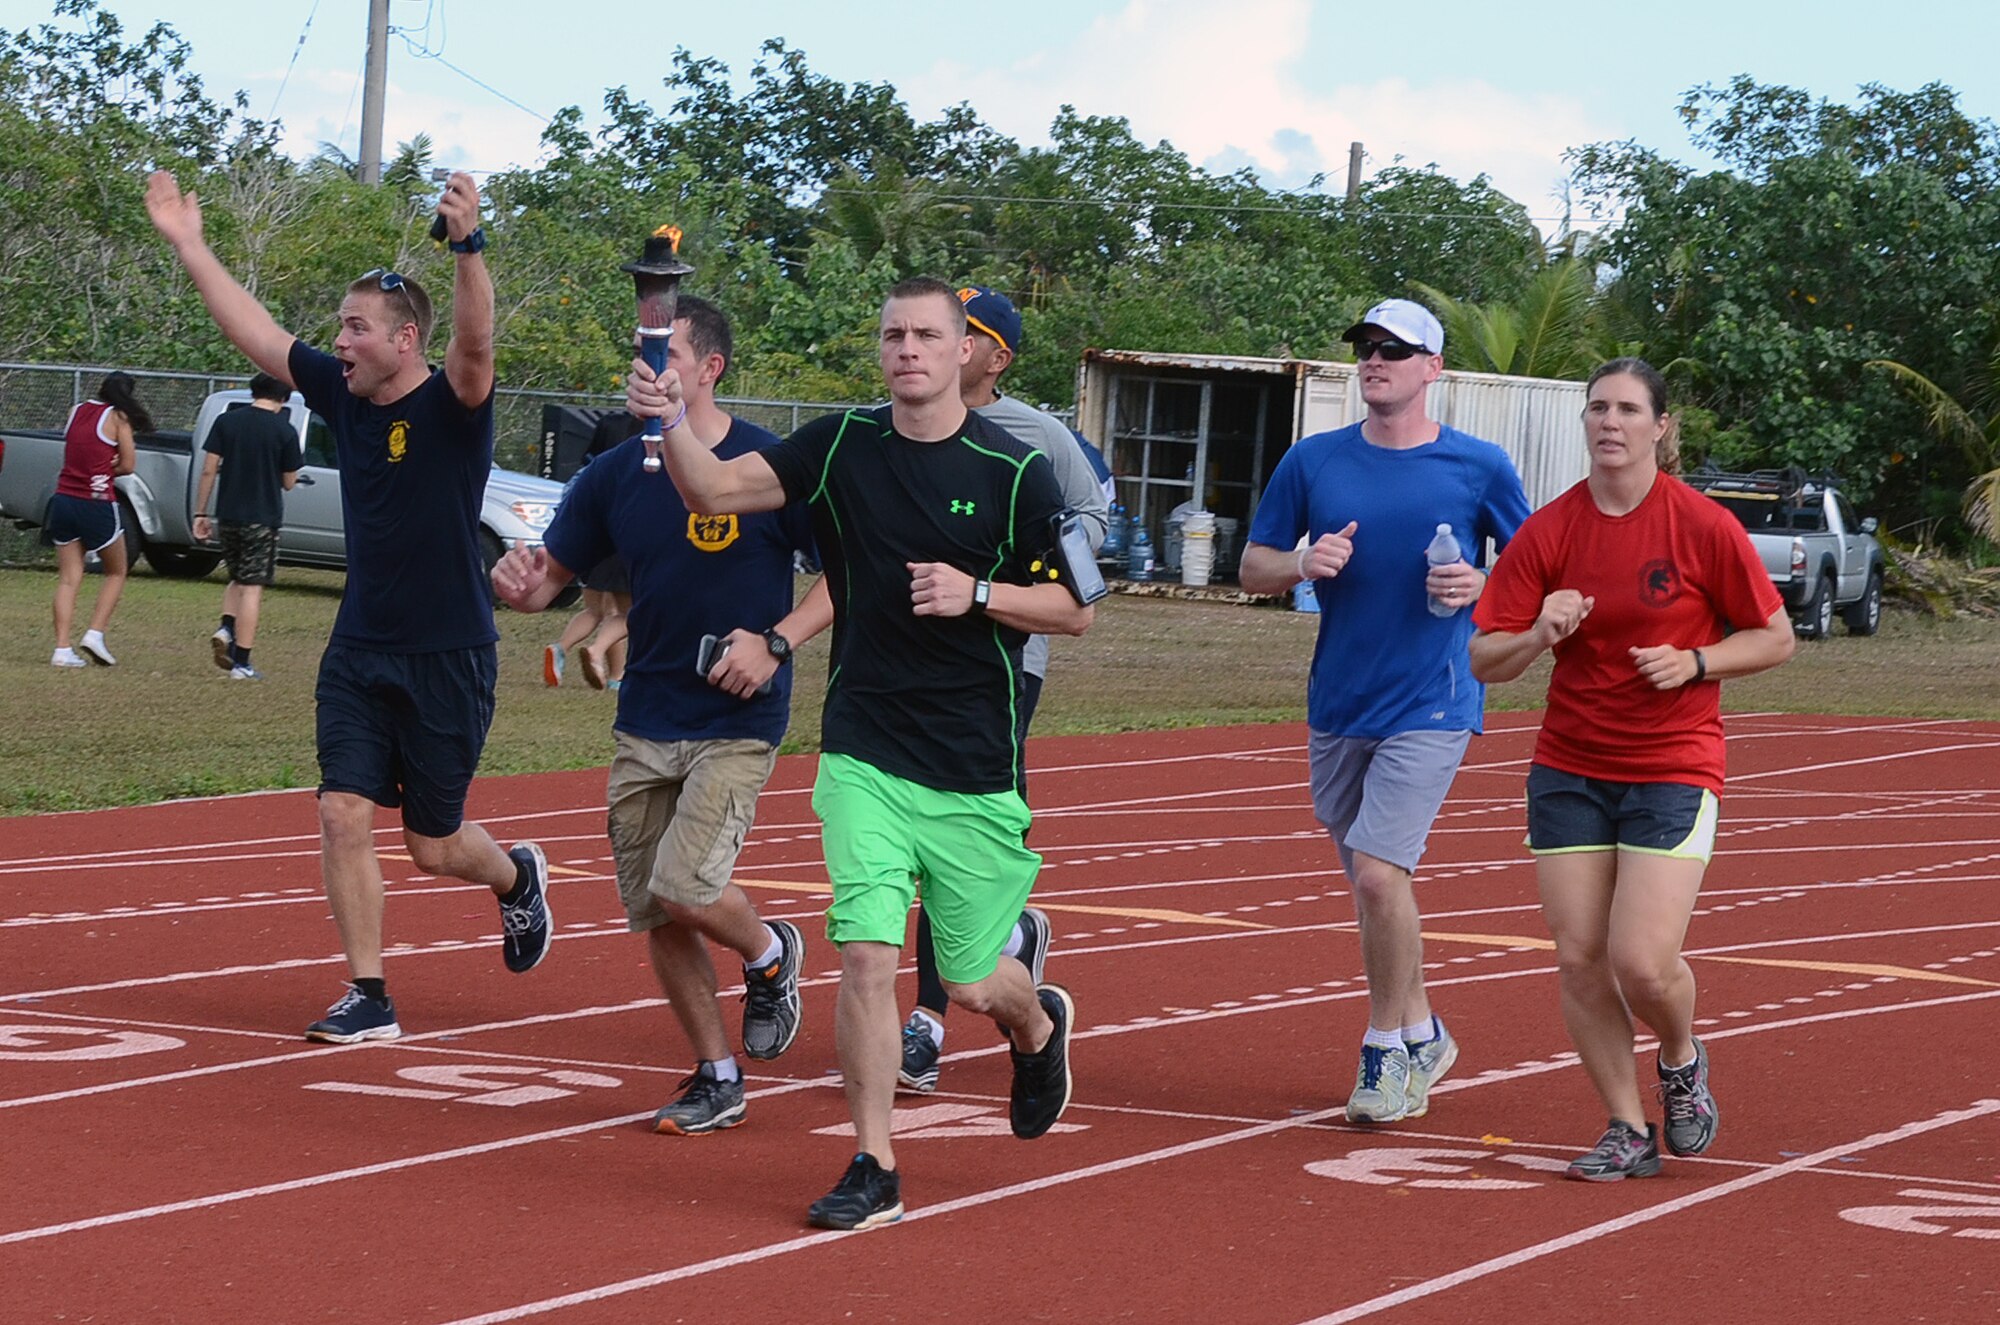 Staff Sgt. Eric Mattson, 554th RED HORSE Squadron, carries the Special Olympics Flame of Hope Torch at Okkodo High School in Dededo, Guam, March 21, 2015. More than 300 service members from all military branches assigned to units on Guam came together to support Special Olympic athletes in a variety of track and field events. (U.S. Air Force photo by Airman 1st Class Alexa Ann Henderson/Released)